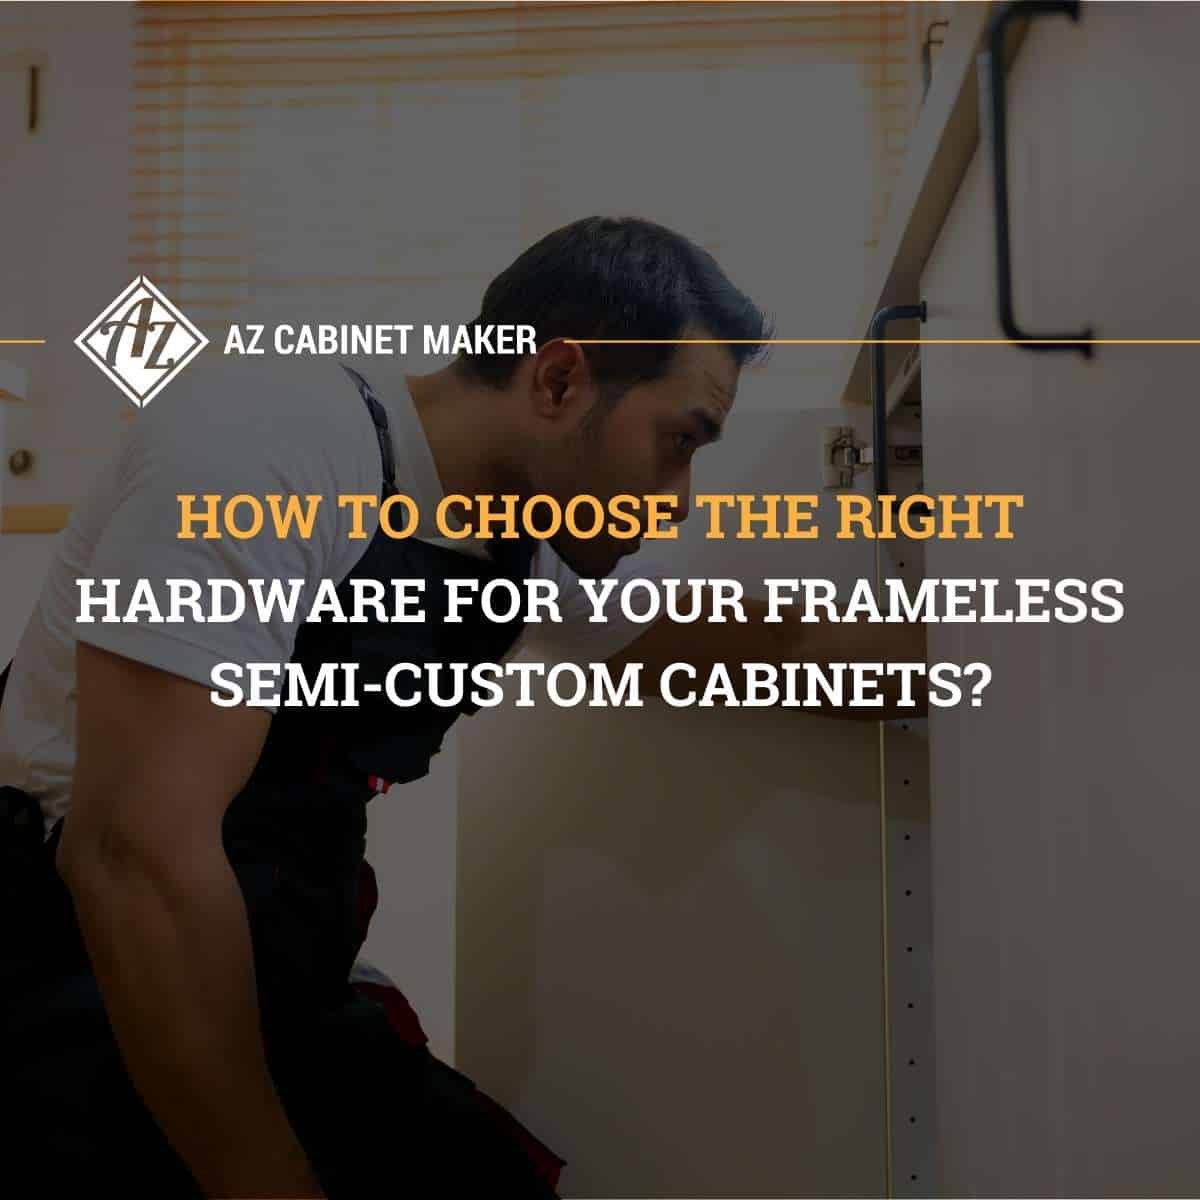 How To Choose The Right Hardware For Your Frameless Semi-Custom Cabinets